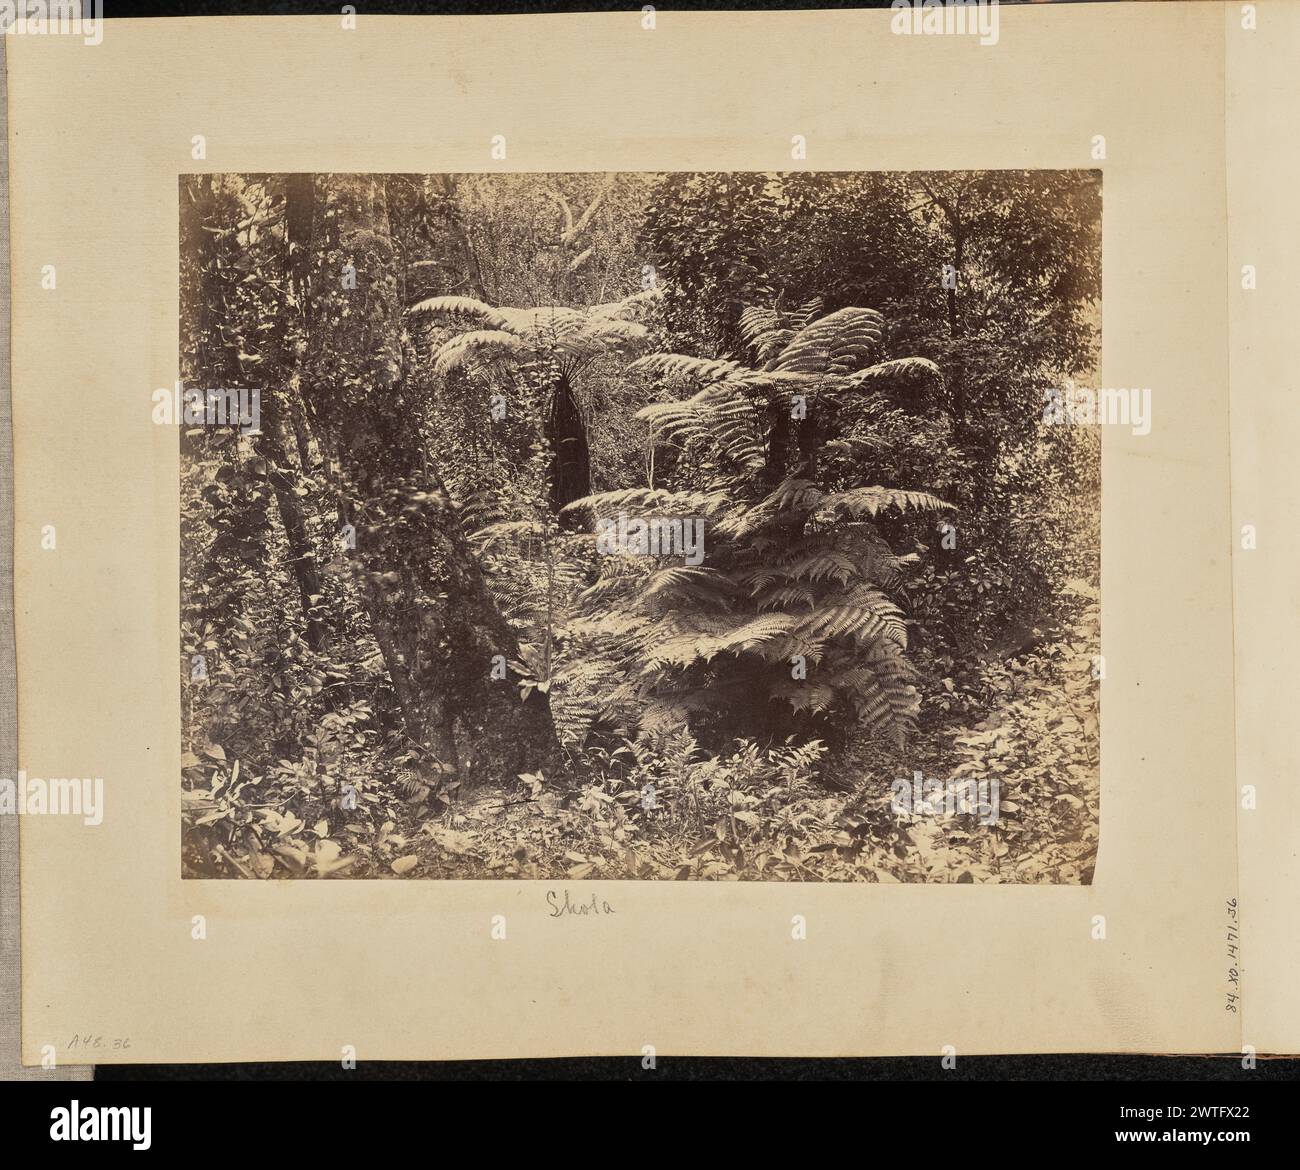 Shola. Unknown, photographer about 1866–1870 View of a densely vegetated area, probably part of a tropical high altitude forest known as a 'shola,' with a number of large ferns in the center of the image. (Recto, print) lower right, inscribed in the negative: '42'; (Recto, mount) lower left, in pencil: 'A48.36'; Lower center, in pencil: 'Shola'; Stock Photo